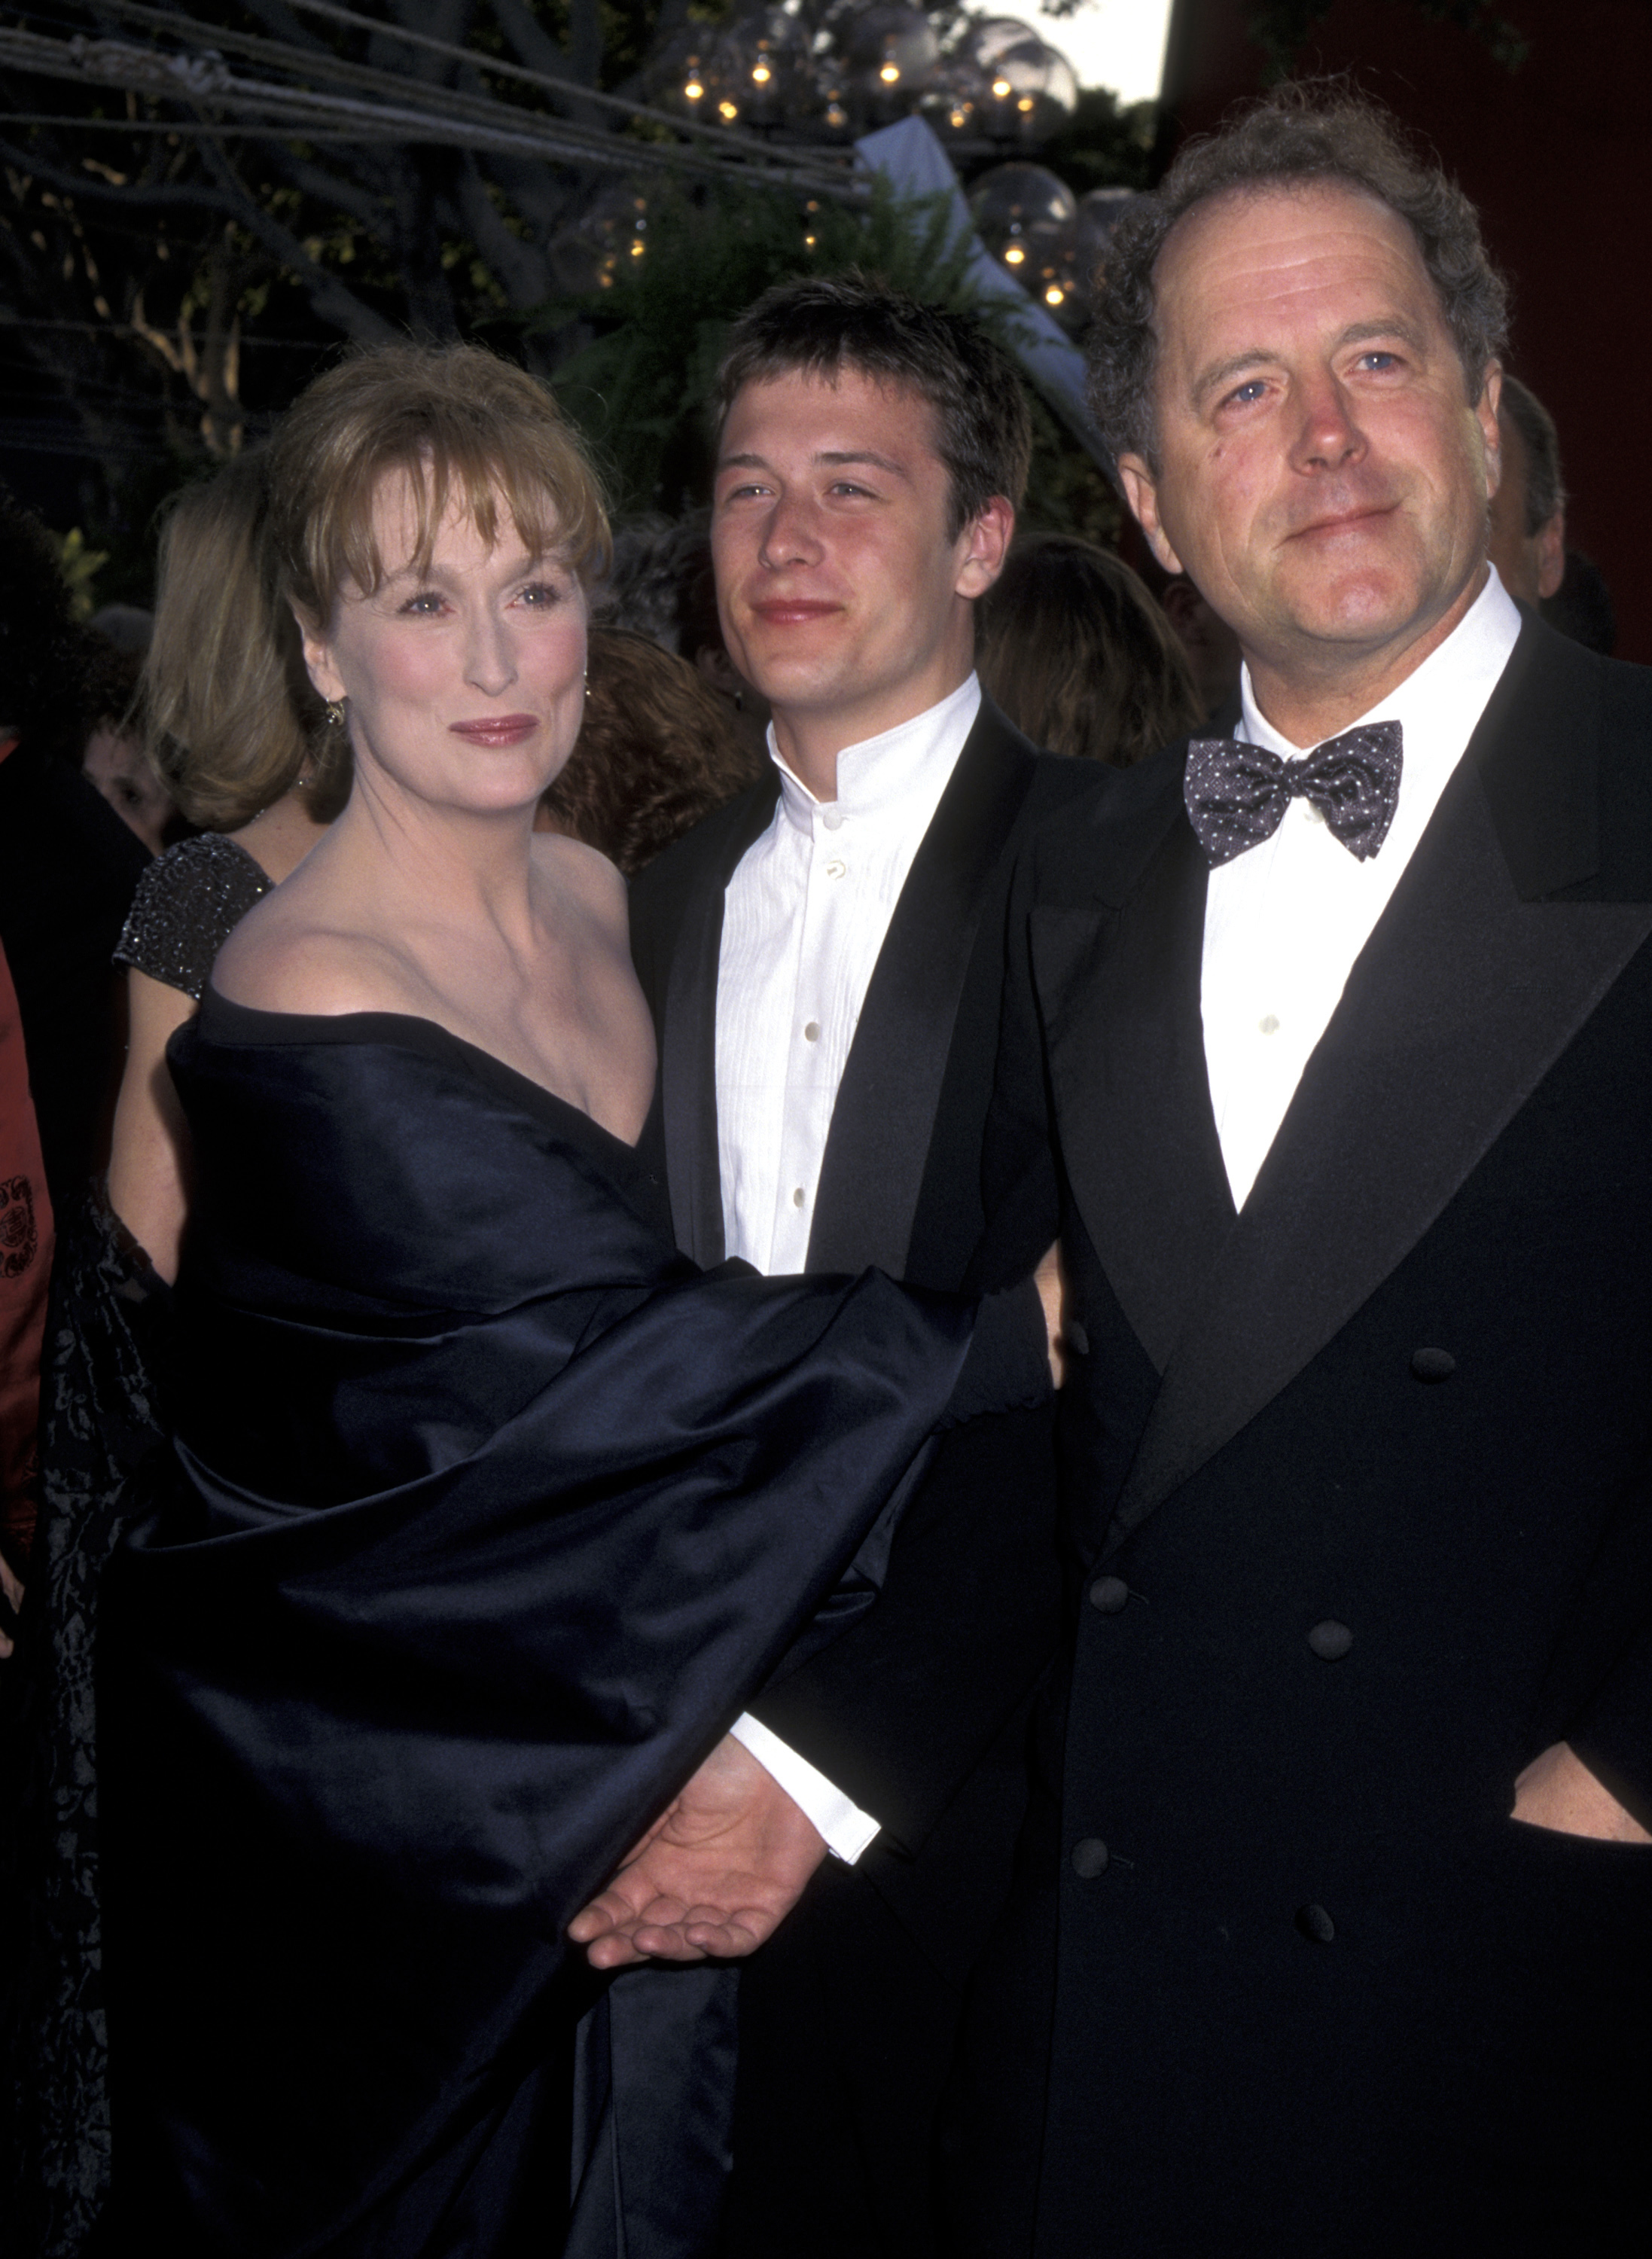 Meryl Streep, Don Gummer, and Henry Gummer at the 68th Annual Academy Awards in Los Angeles, California on March 25, 1996 | Source: Getty Images